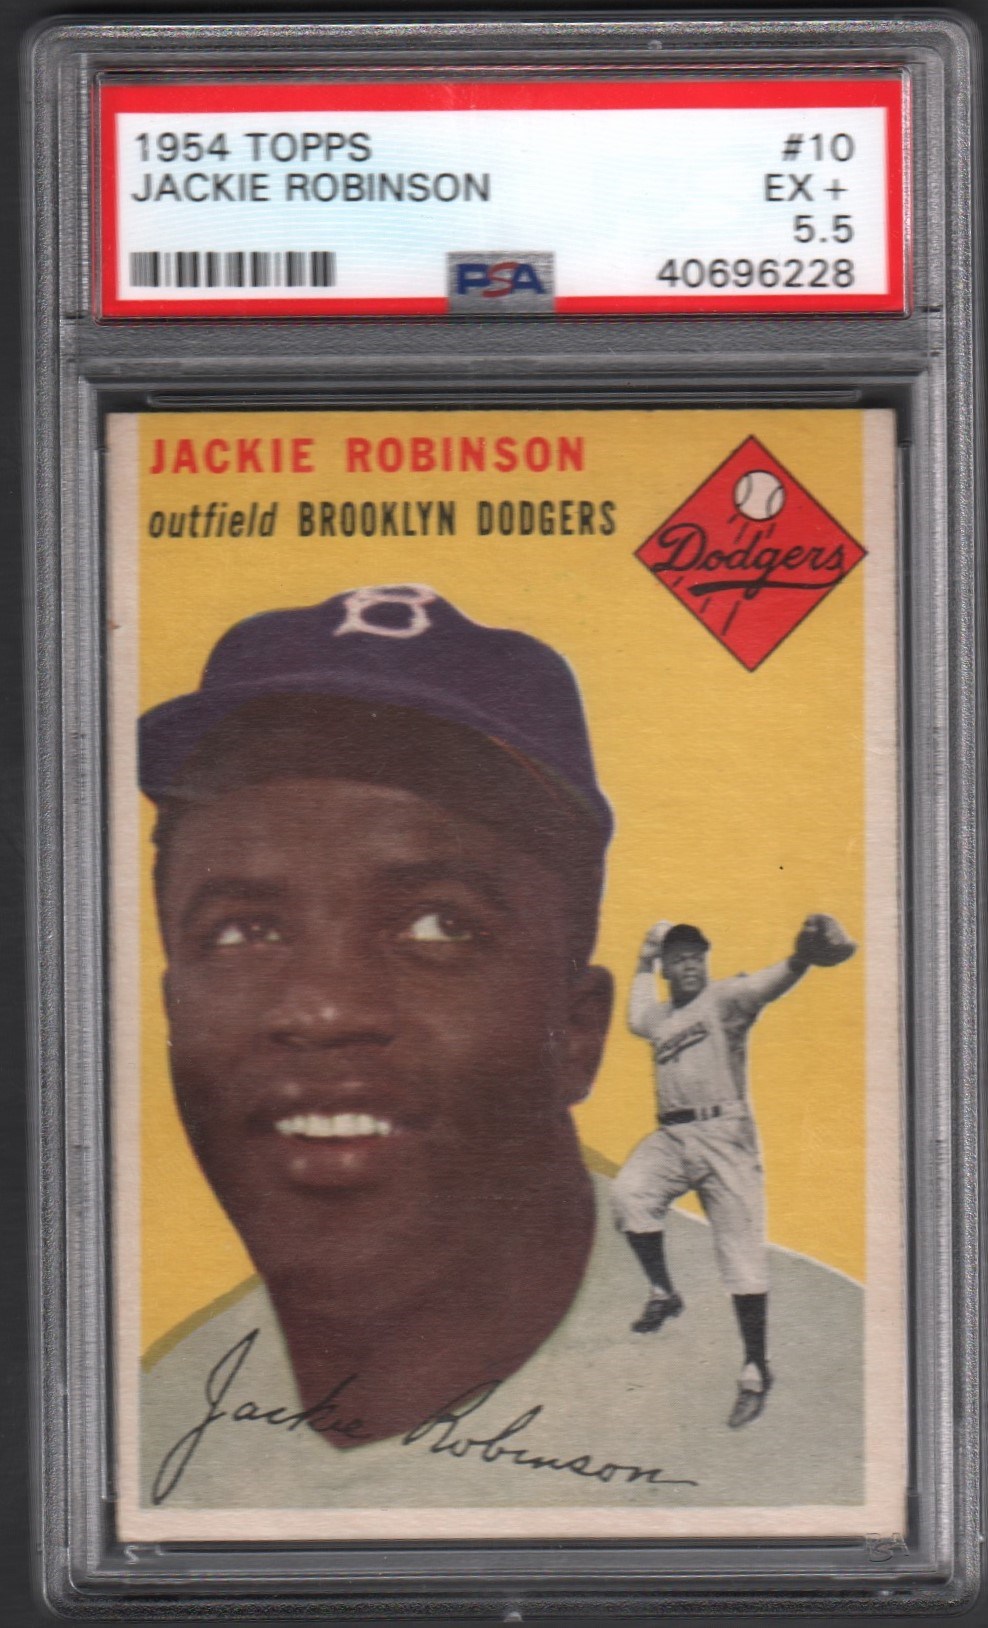 - 1954 and 1955 Topps Jackie Robinson PSA Graded Cards (2)